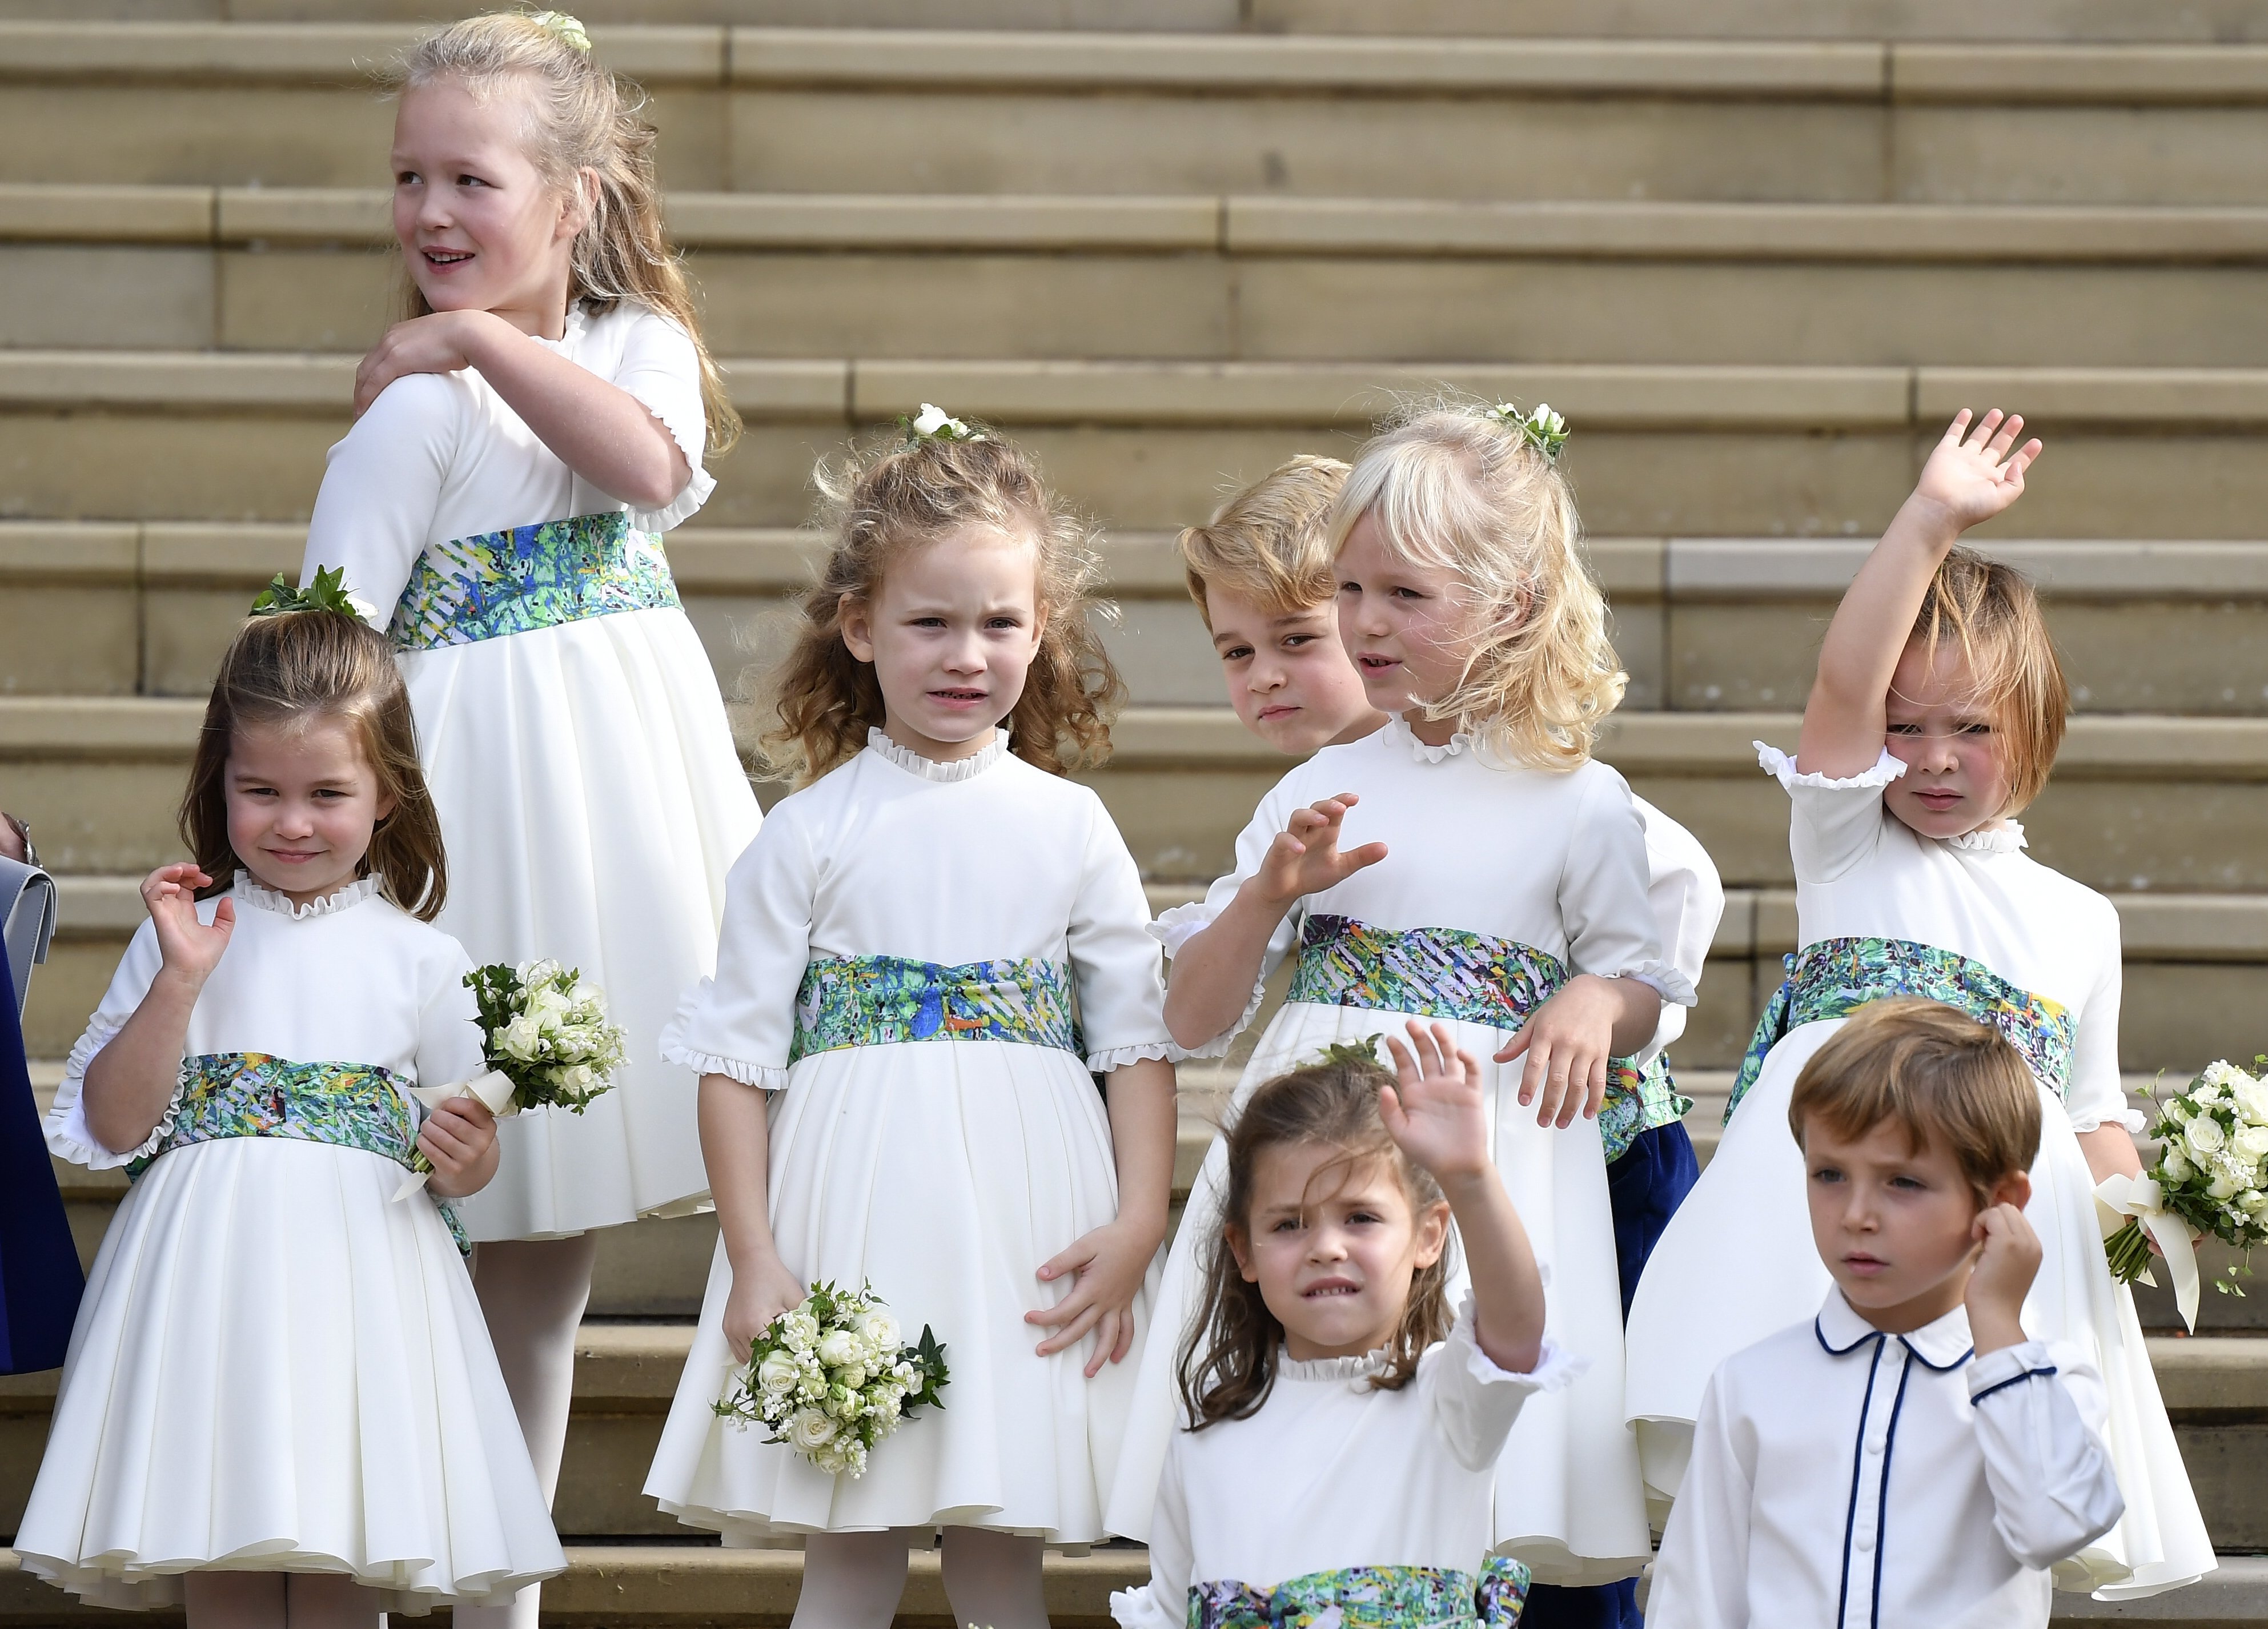 Bridesmaids Princess Charlotte, Savannah Phillips, Maud Windsor, page boy Prince George, bridesmaids Isla Phillips, Theodora Williams, Mia Tindall and page boy Louis de Givenchy pictured leaving after the royal wedding of Princess Eugenie of York to Jack Brooksbank at St. George's Chapel on October 12, 2018 in Windsor, England | Source: Getty Images